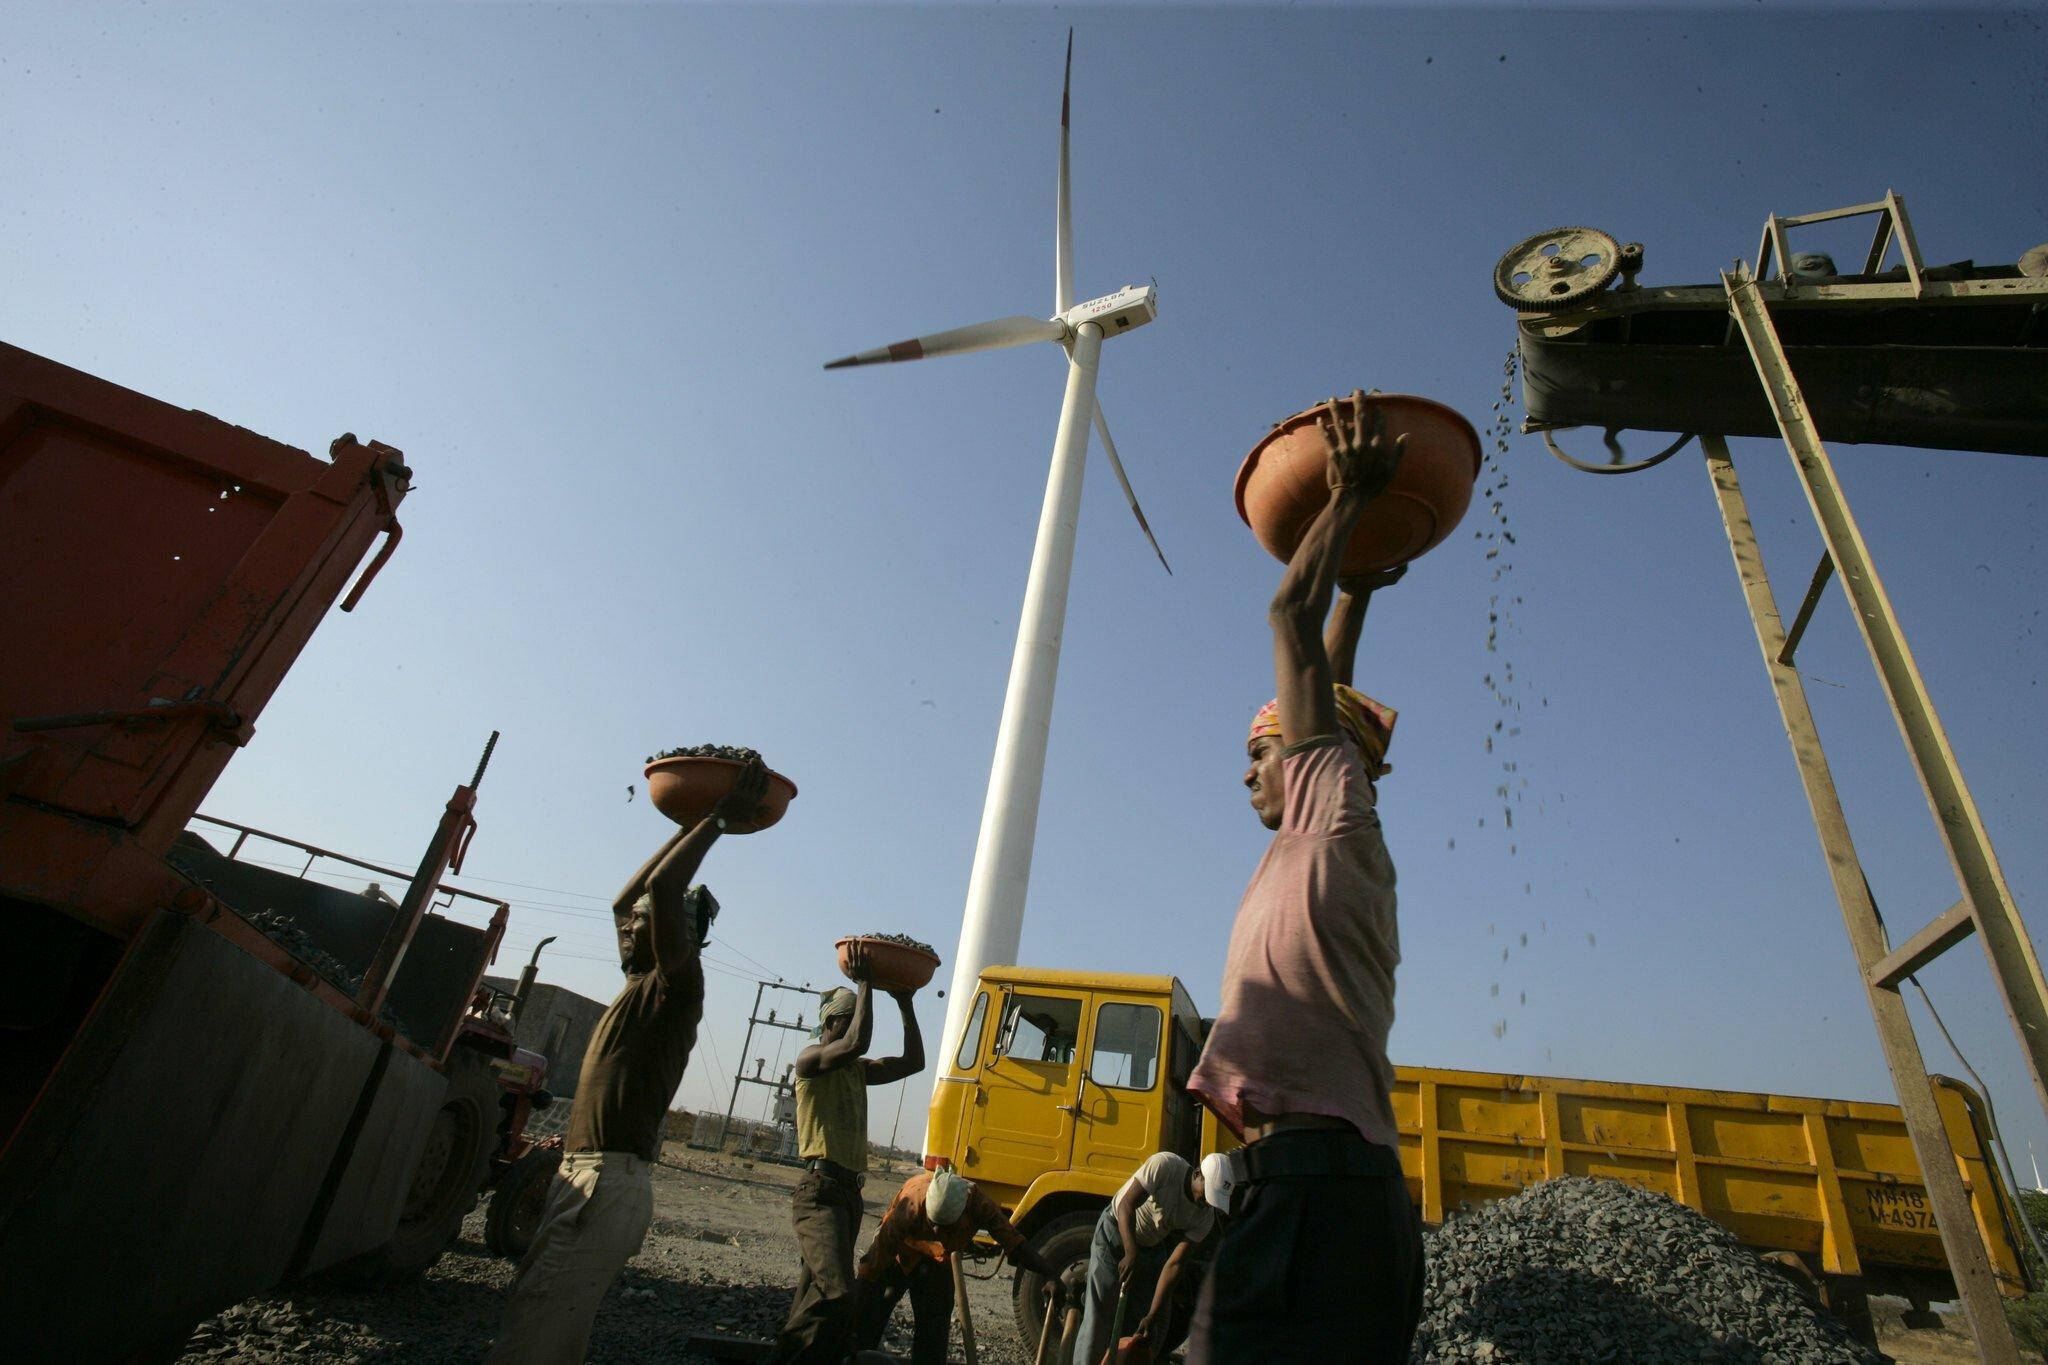 A photograph of a man carrying fuel with a wind turbine in the background